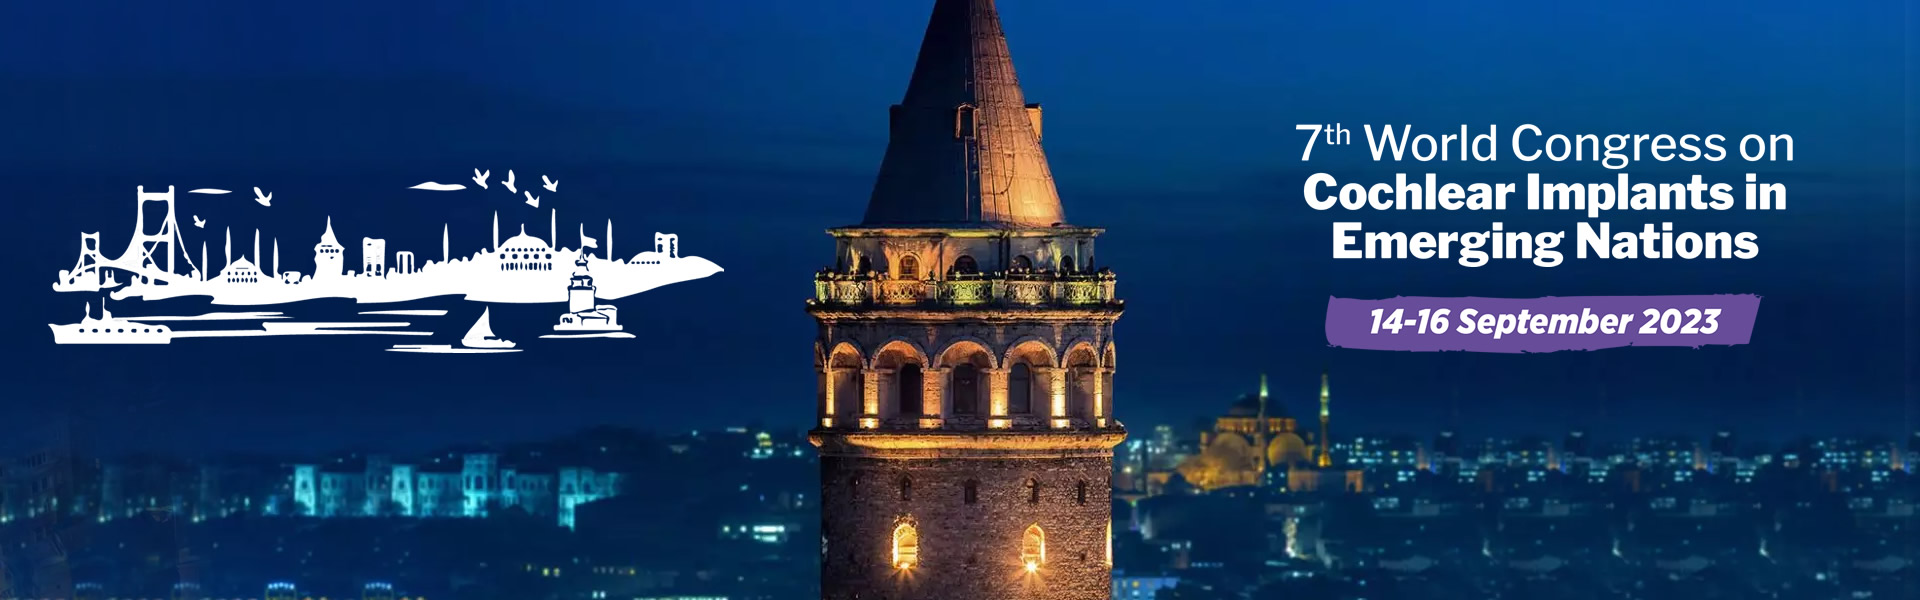 7th CONFERENCE ON CI IN EMERGING NATIONS, ISTANBUL, 14-16 SEPTEMBER